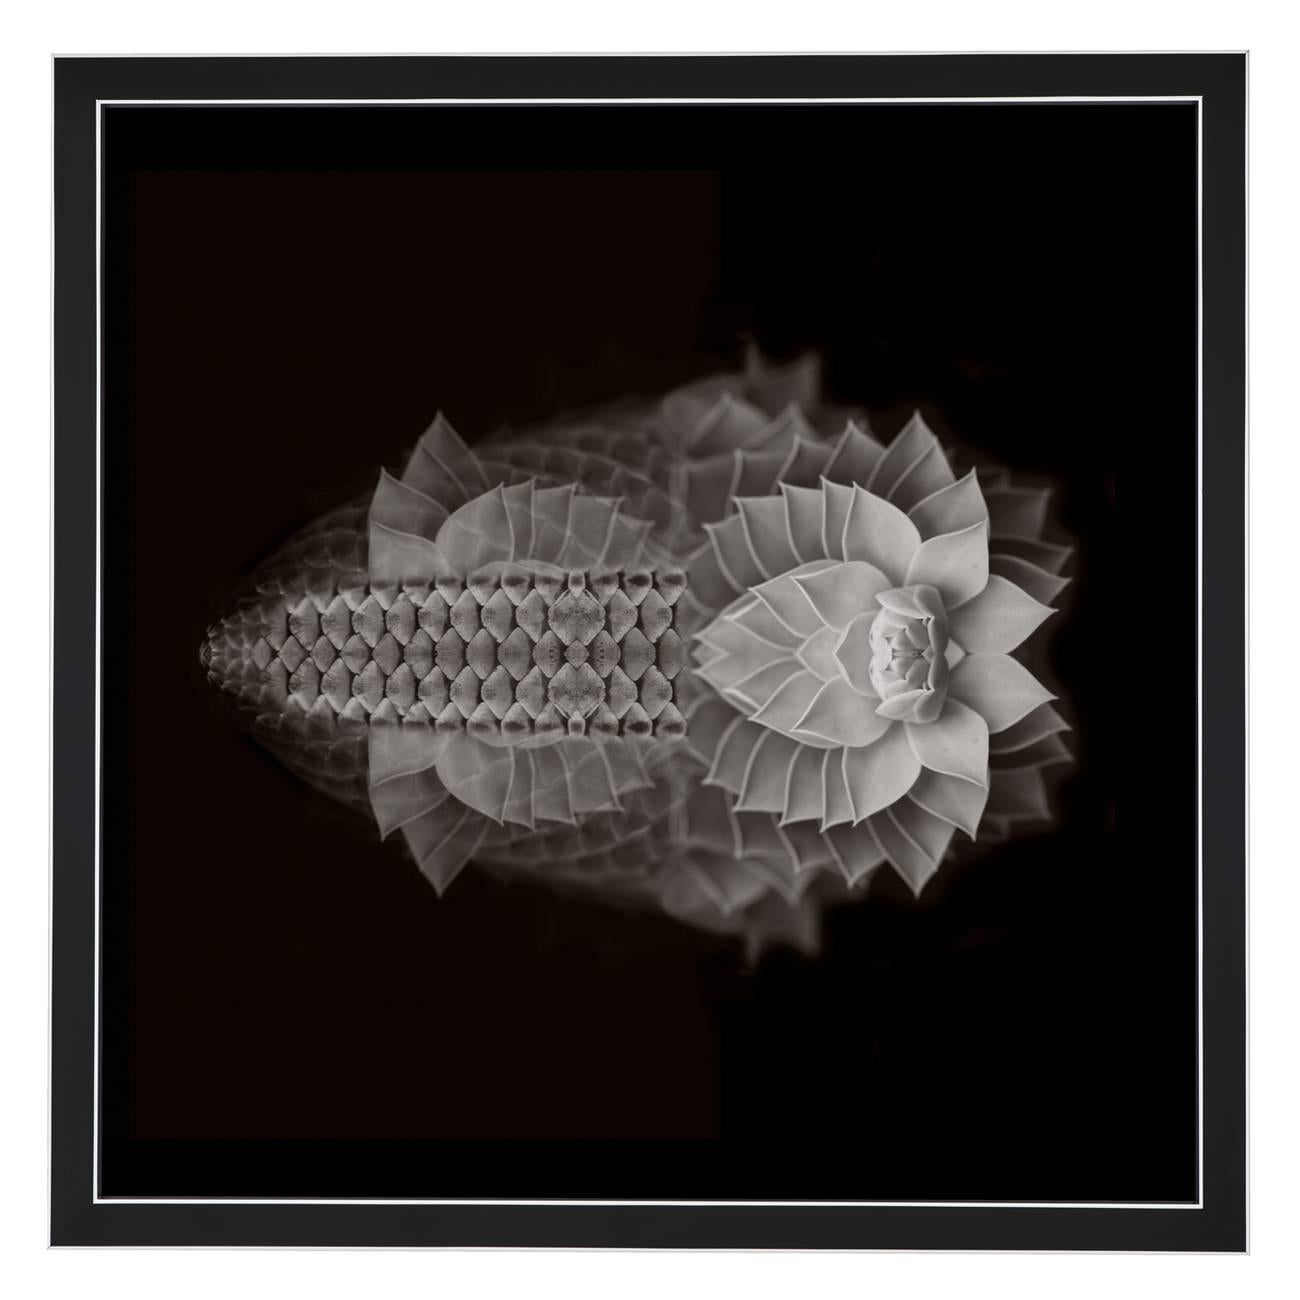 Composition:

Euphorbia Myrsinites, Aloe ferox, Tiger Fish.

Limited edition. Each image is uniquely printed directly to 5mm acrylic glass using UV cured pigment inks giving each photograph real depth and clarity. Every picture is beautifully framed